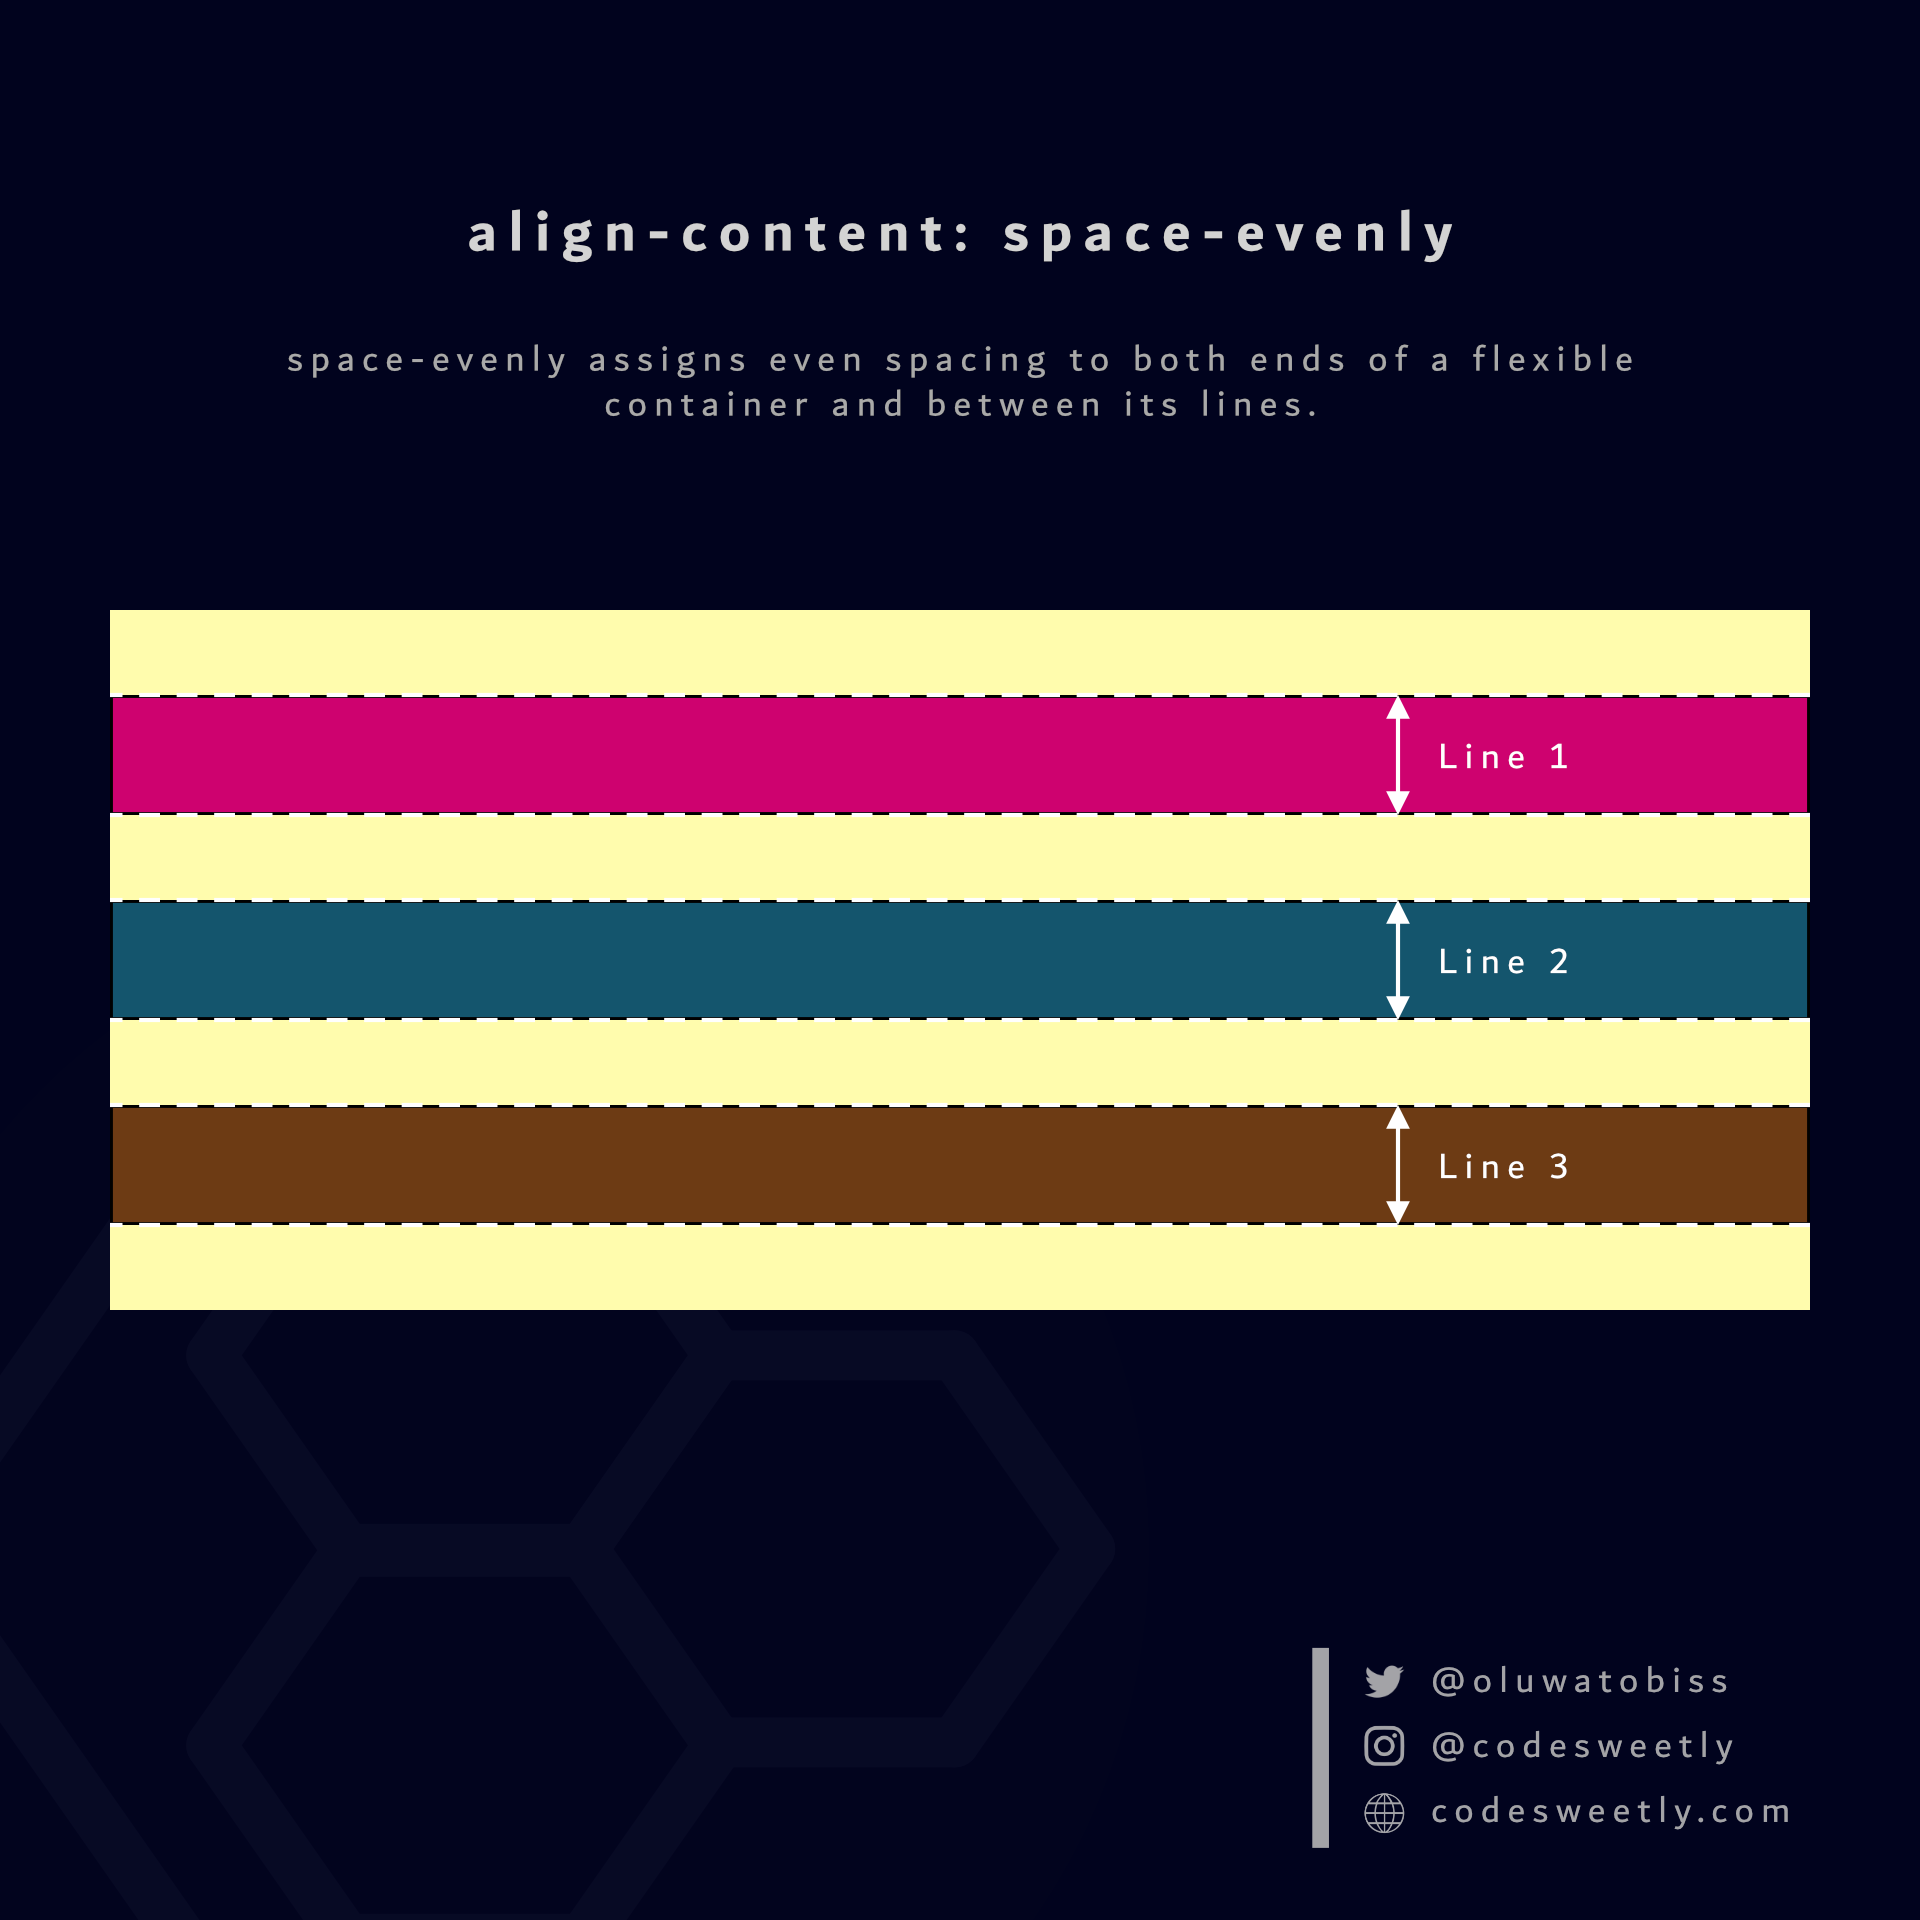 align-content's space-evenly value ensures even spacing on both ends of a flexbox and between its lines